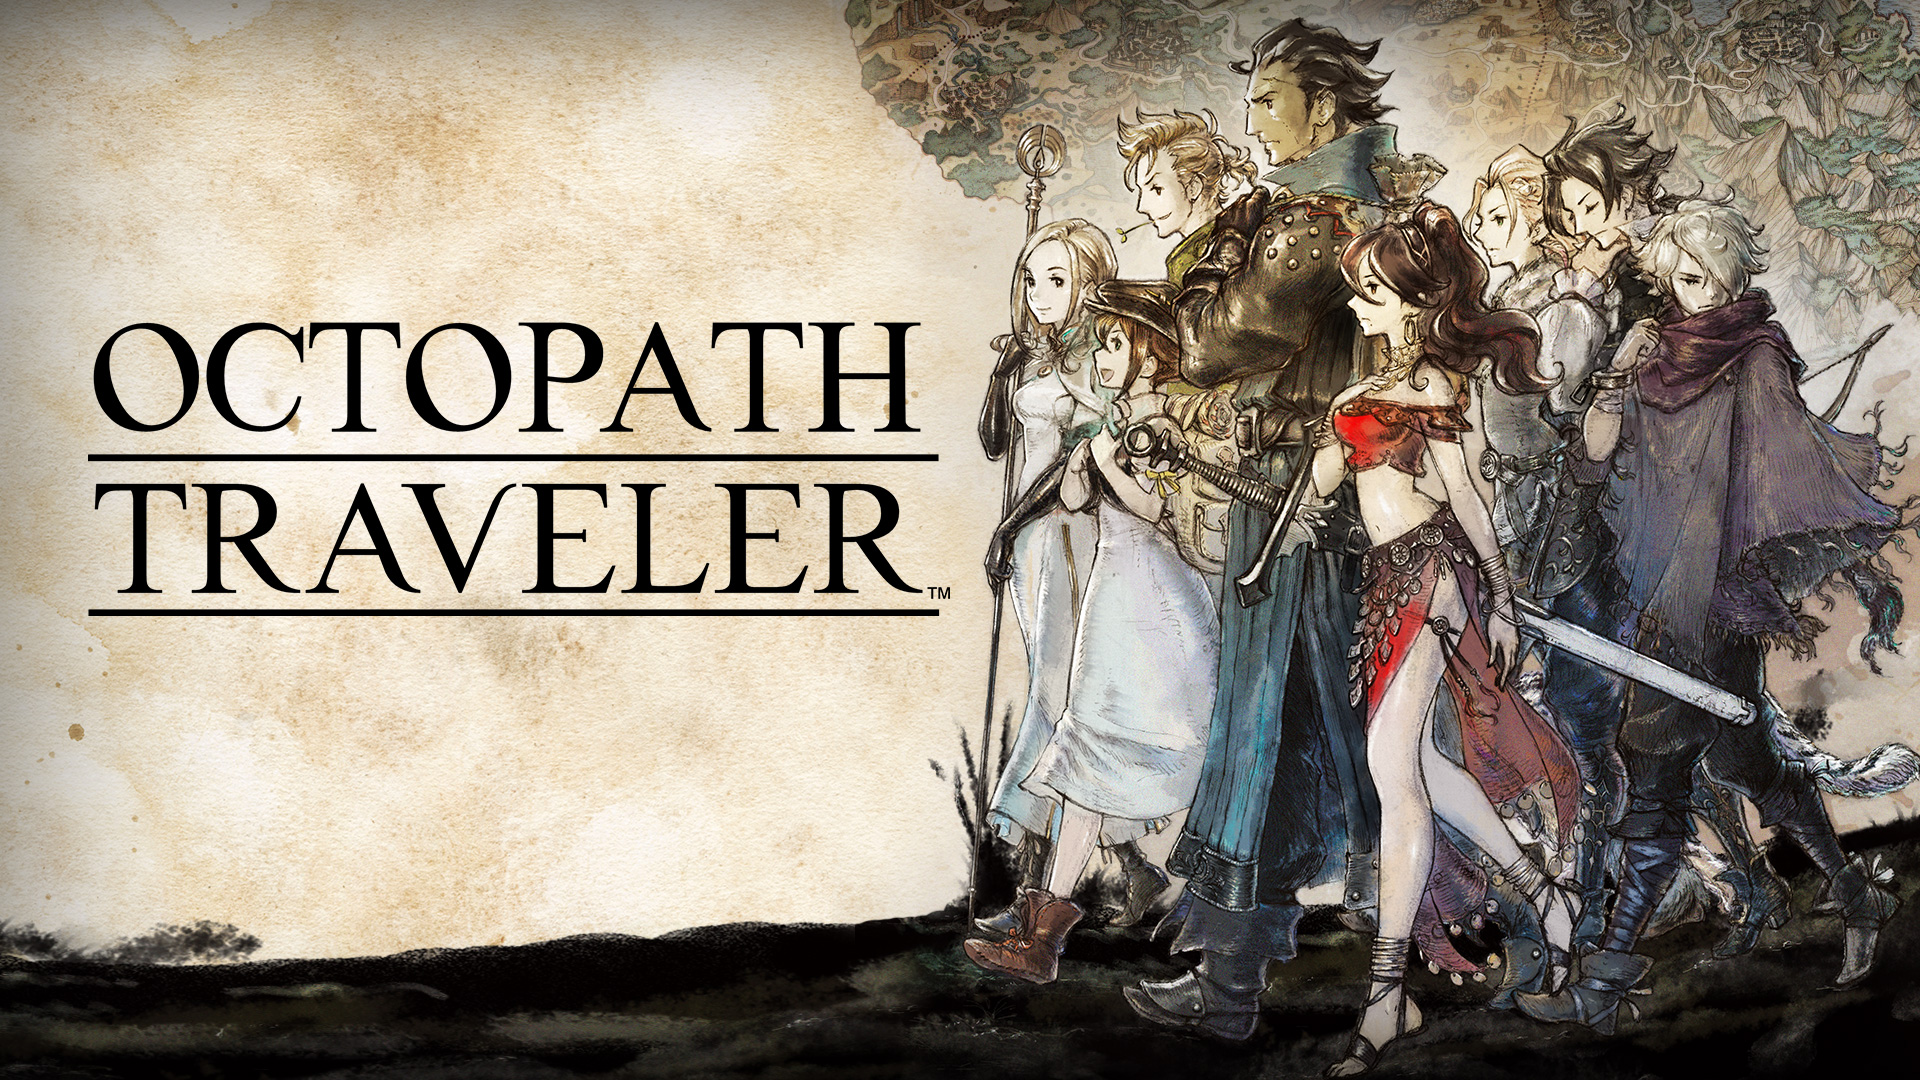 download octopath traveler 2 for free